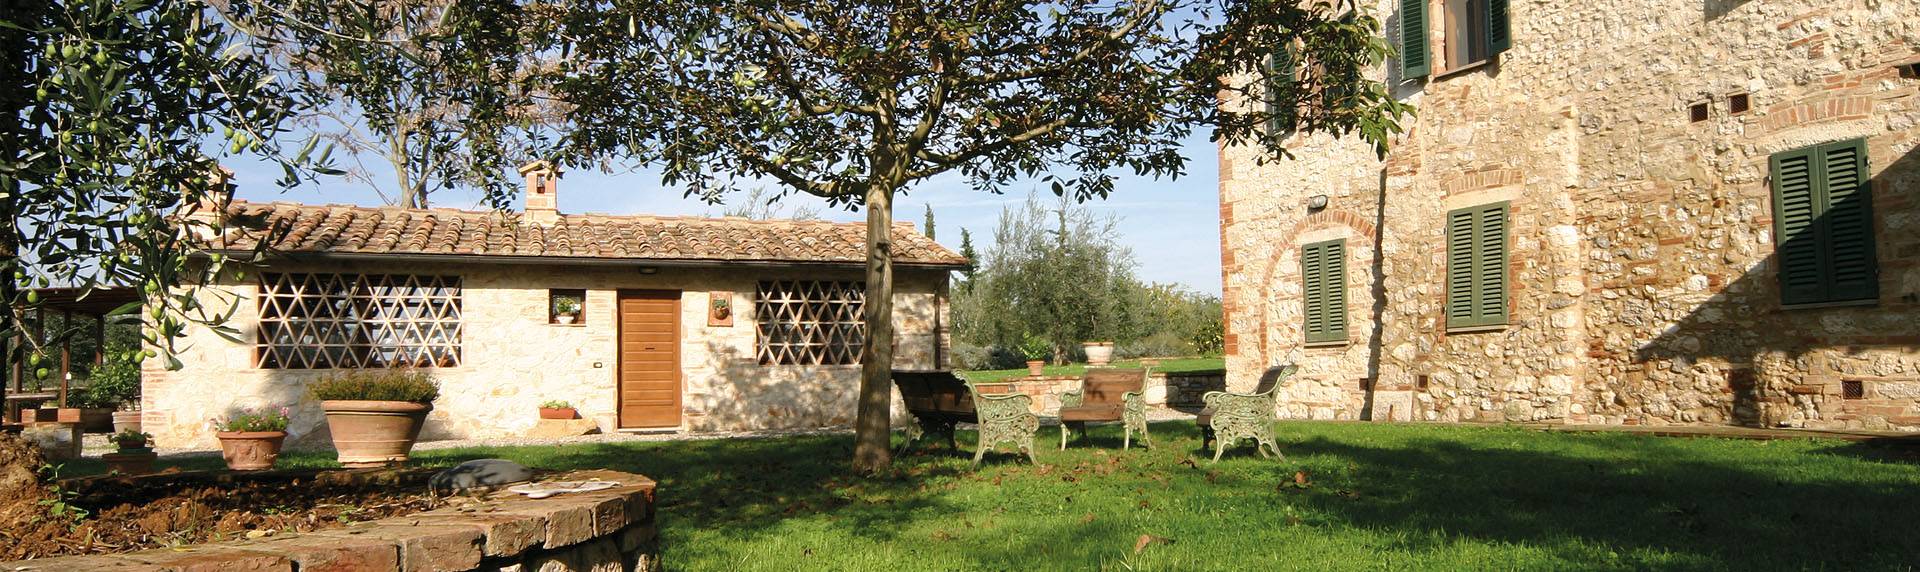 toscana italy guesthouse colledivaldelsa tuscany poderefontemaggio